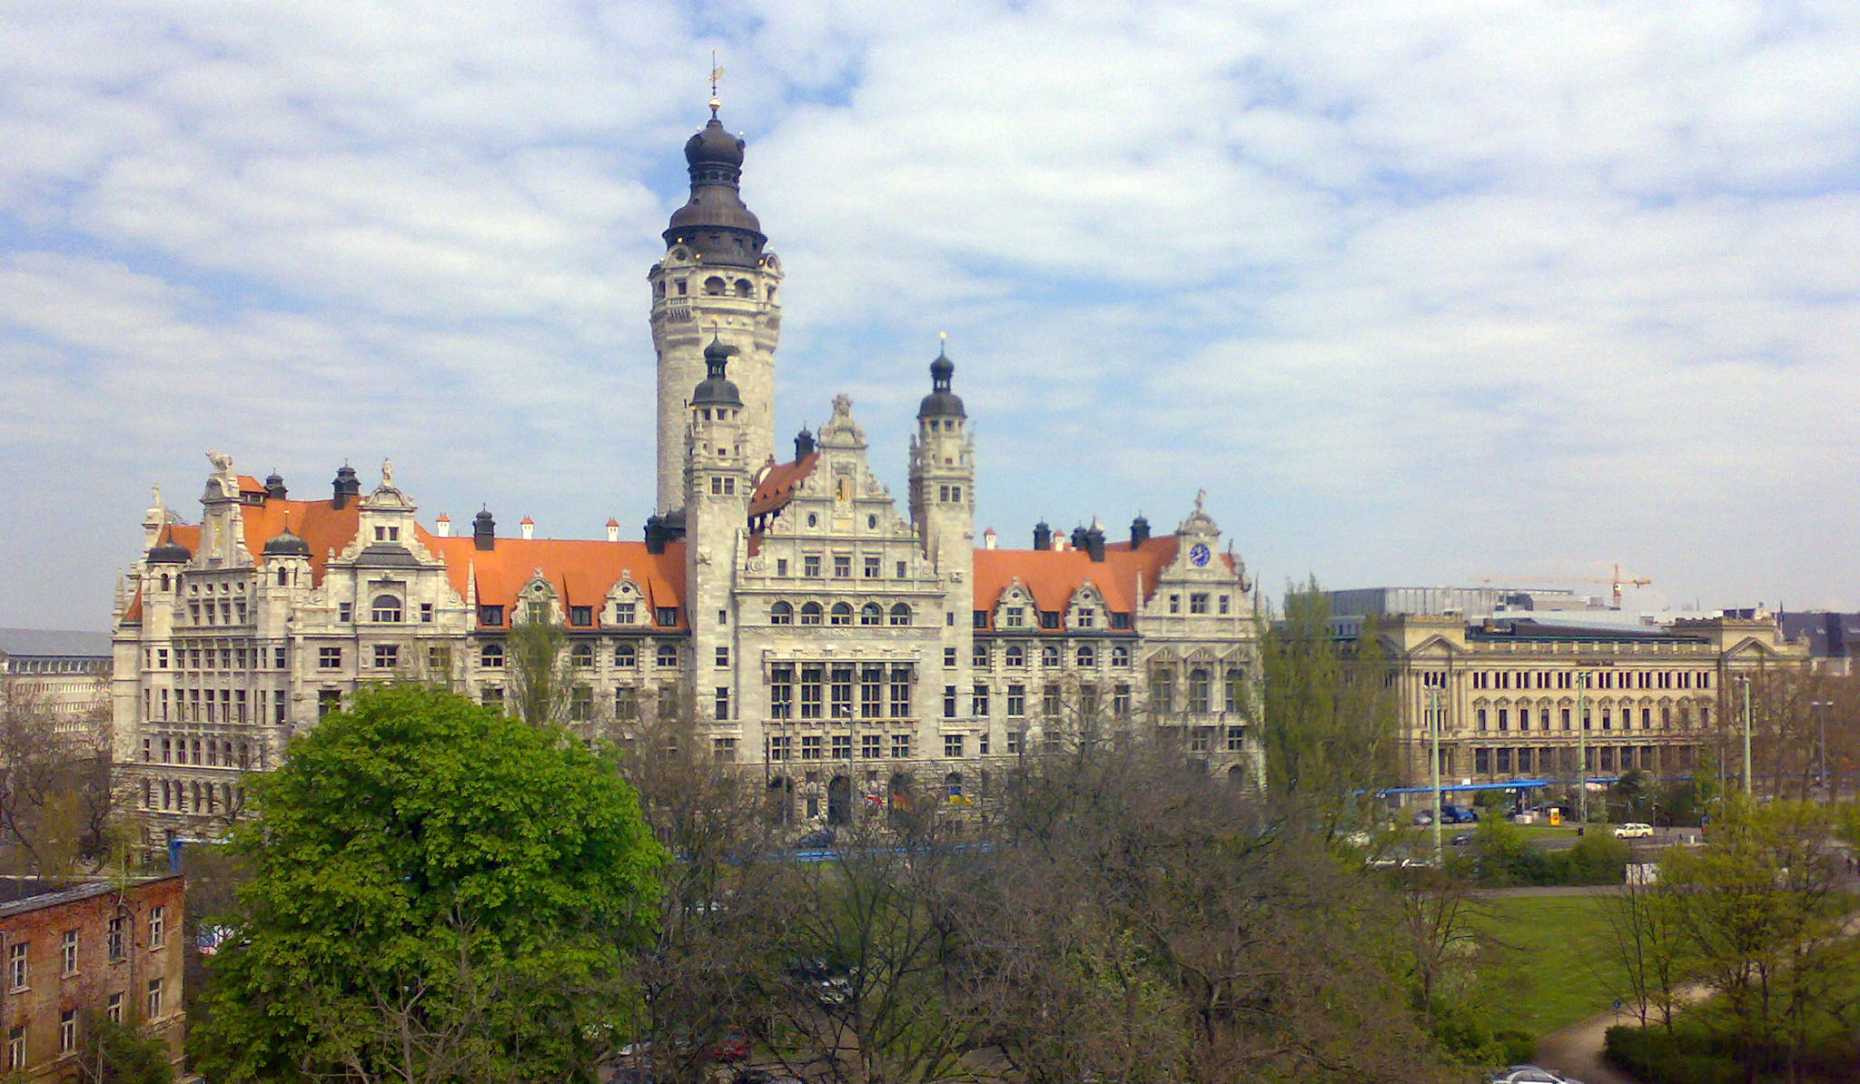 Enlarged view: Leipzig town hall